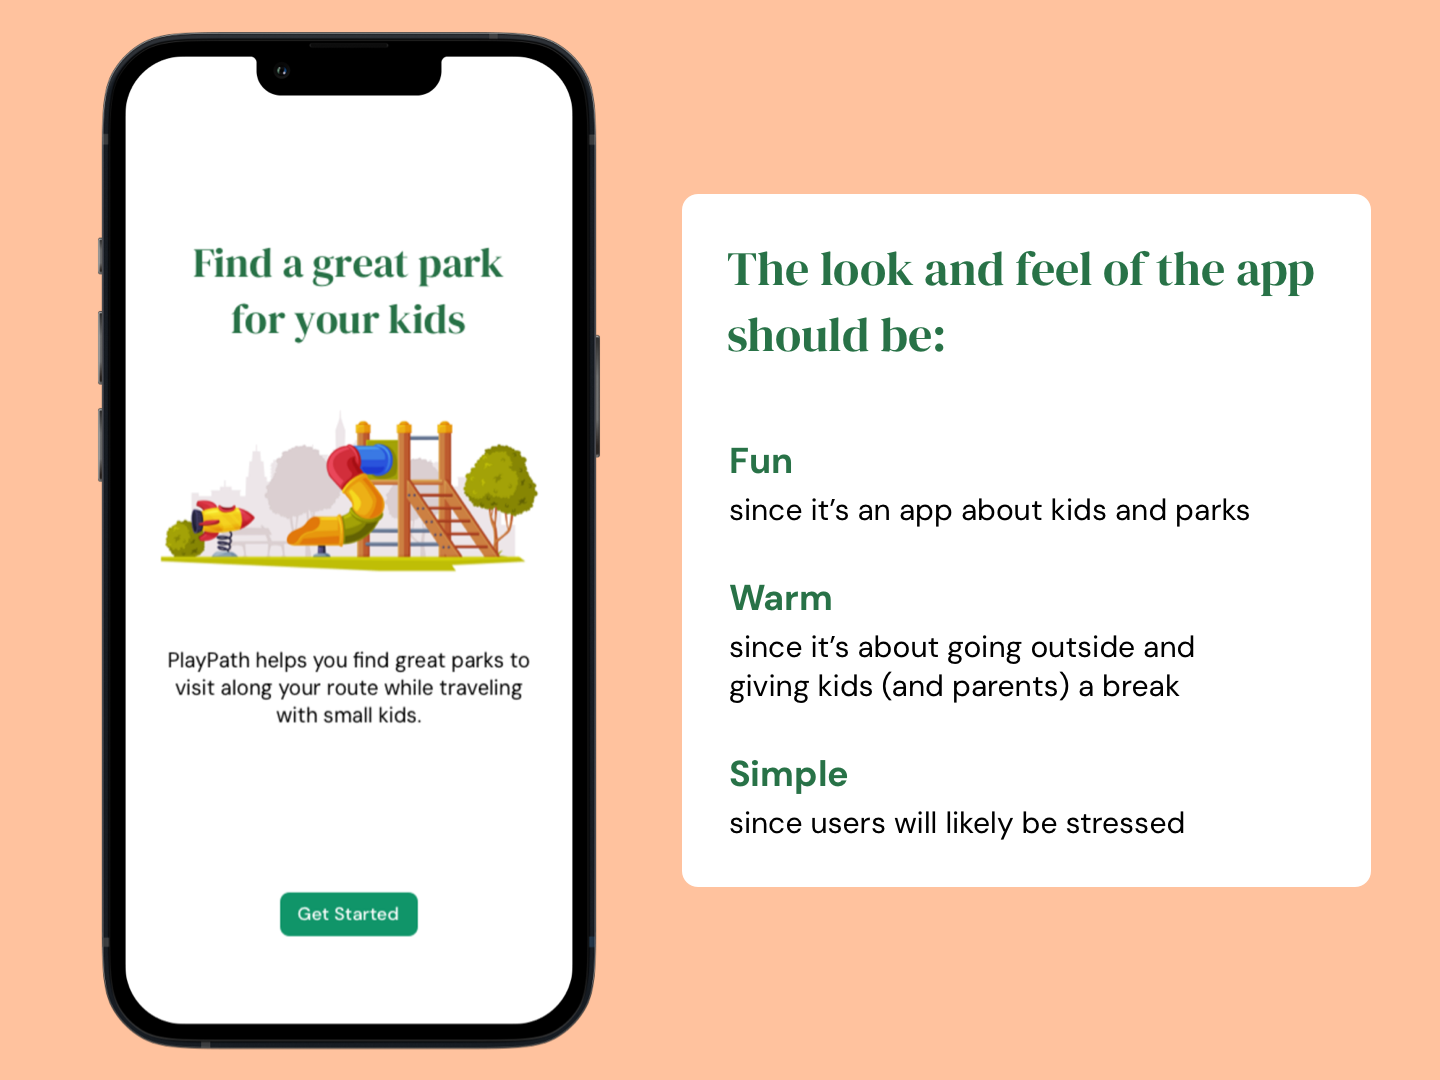 A digital mockup of the PlayPath Welcome screen shown on an iPhone. It's accompanied by the following text: The look and feel of the app should be fun, since it's an app about kids and parks; warm, since it's about going outside and giving kids and parents a break, and simple, since users will likely be stressed.